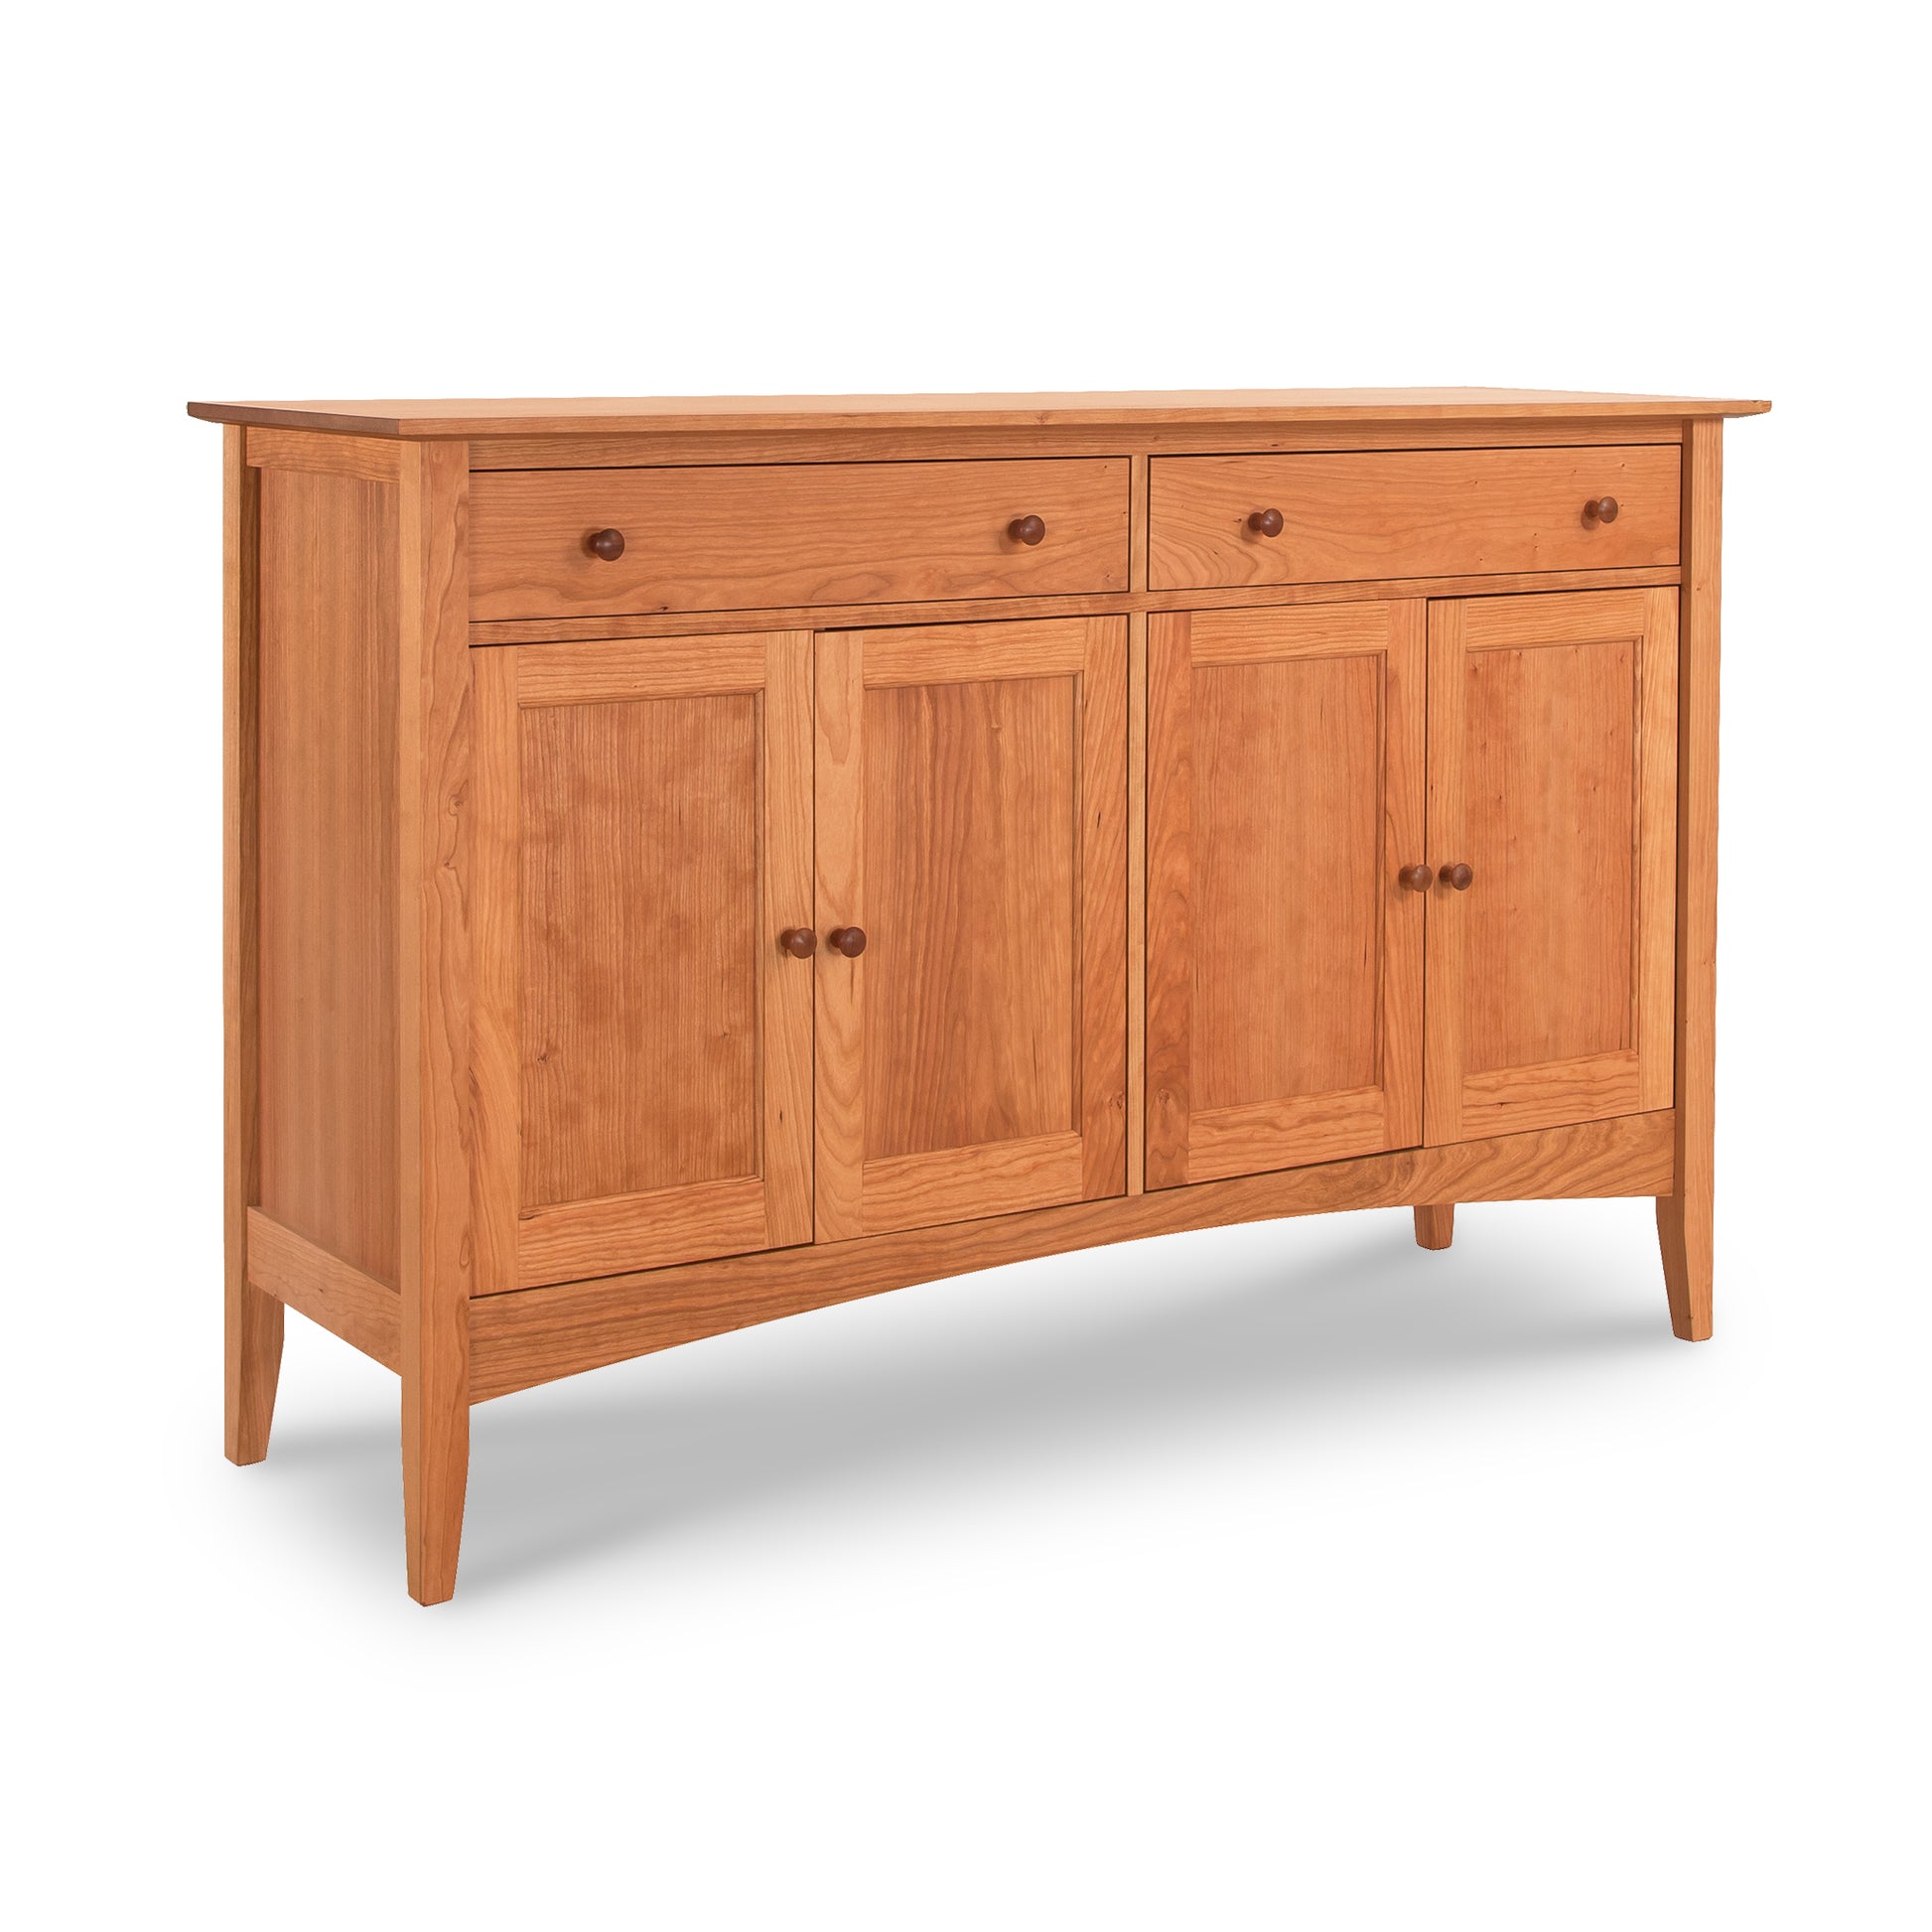 A solid hardwood construction Maple Corner Woodworks American Shaker large sideboard with three drawers and three doors on a white background.